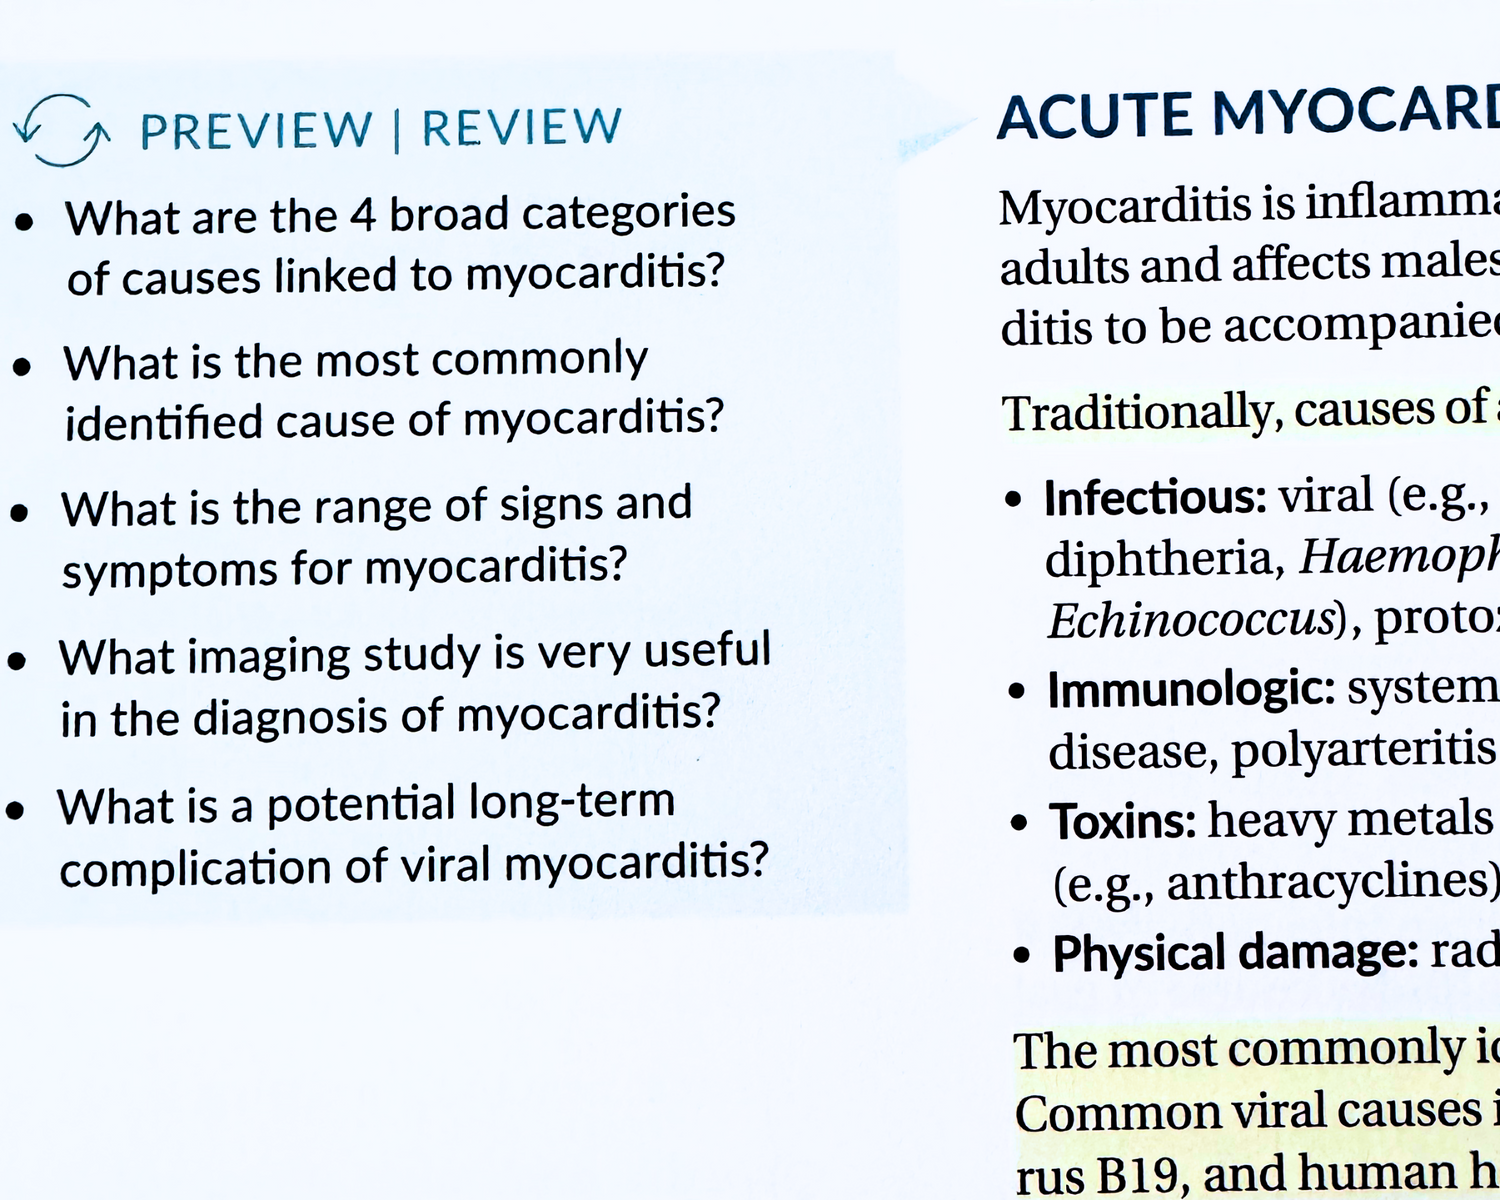 Preview Review questions at the beginning of the acute myocarditis section of the medical Student Core Cardiology book